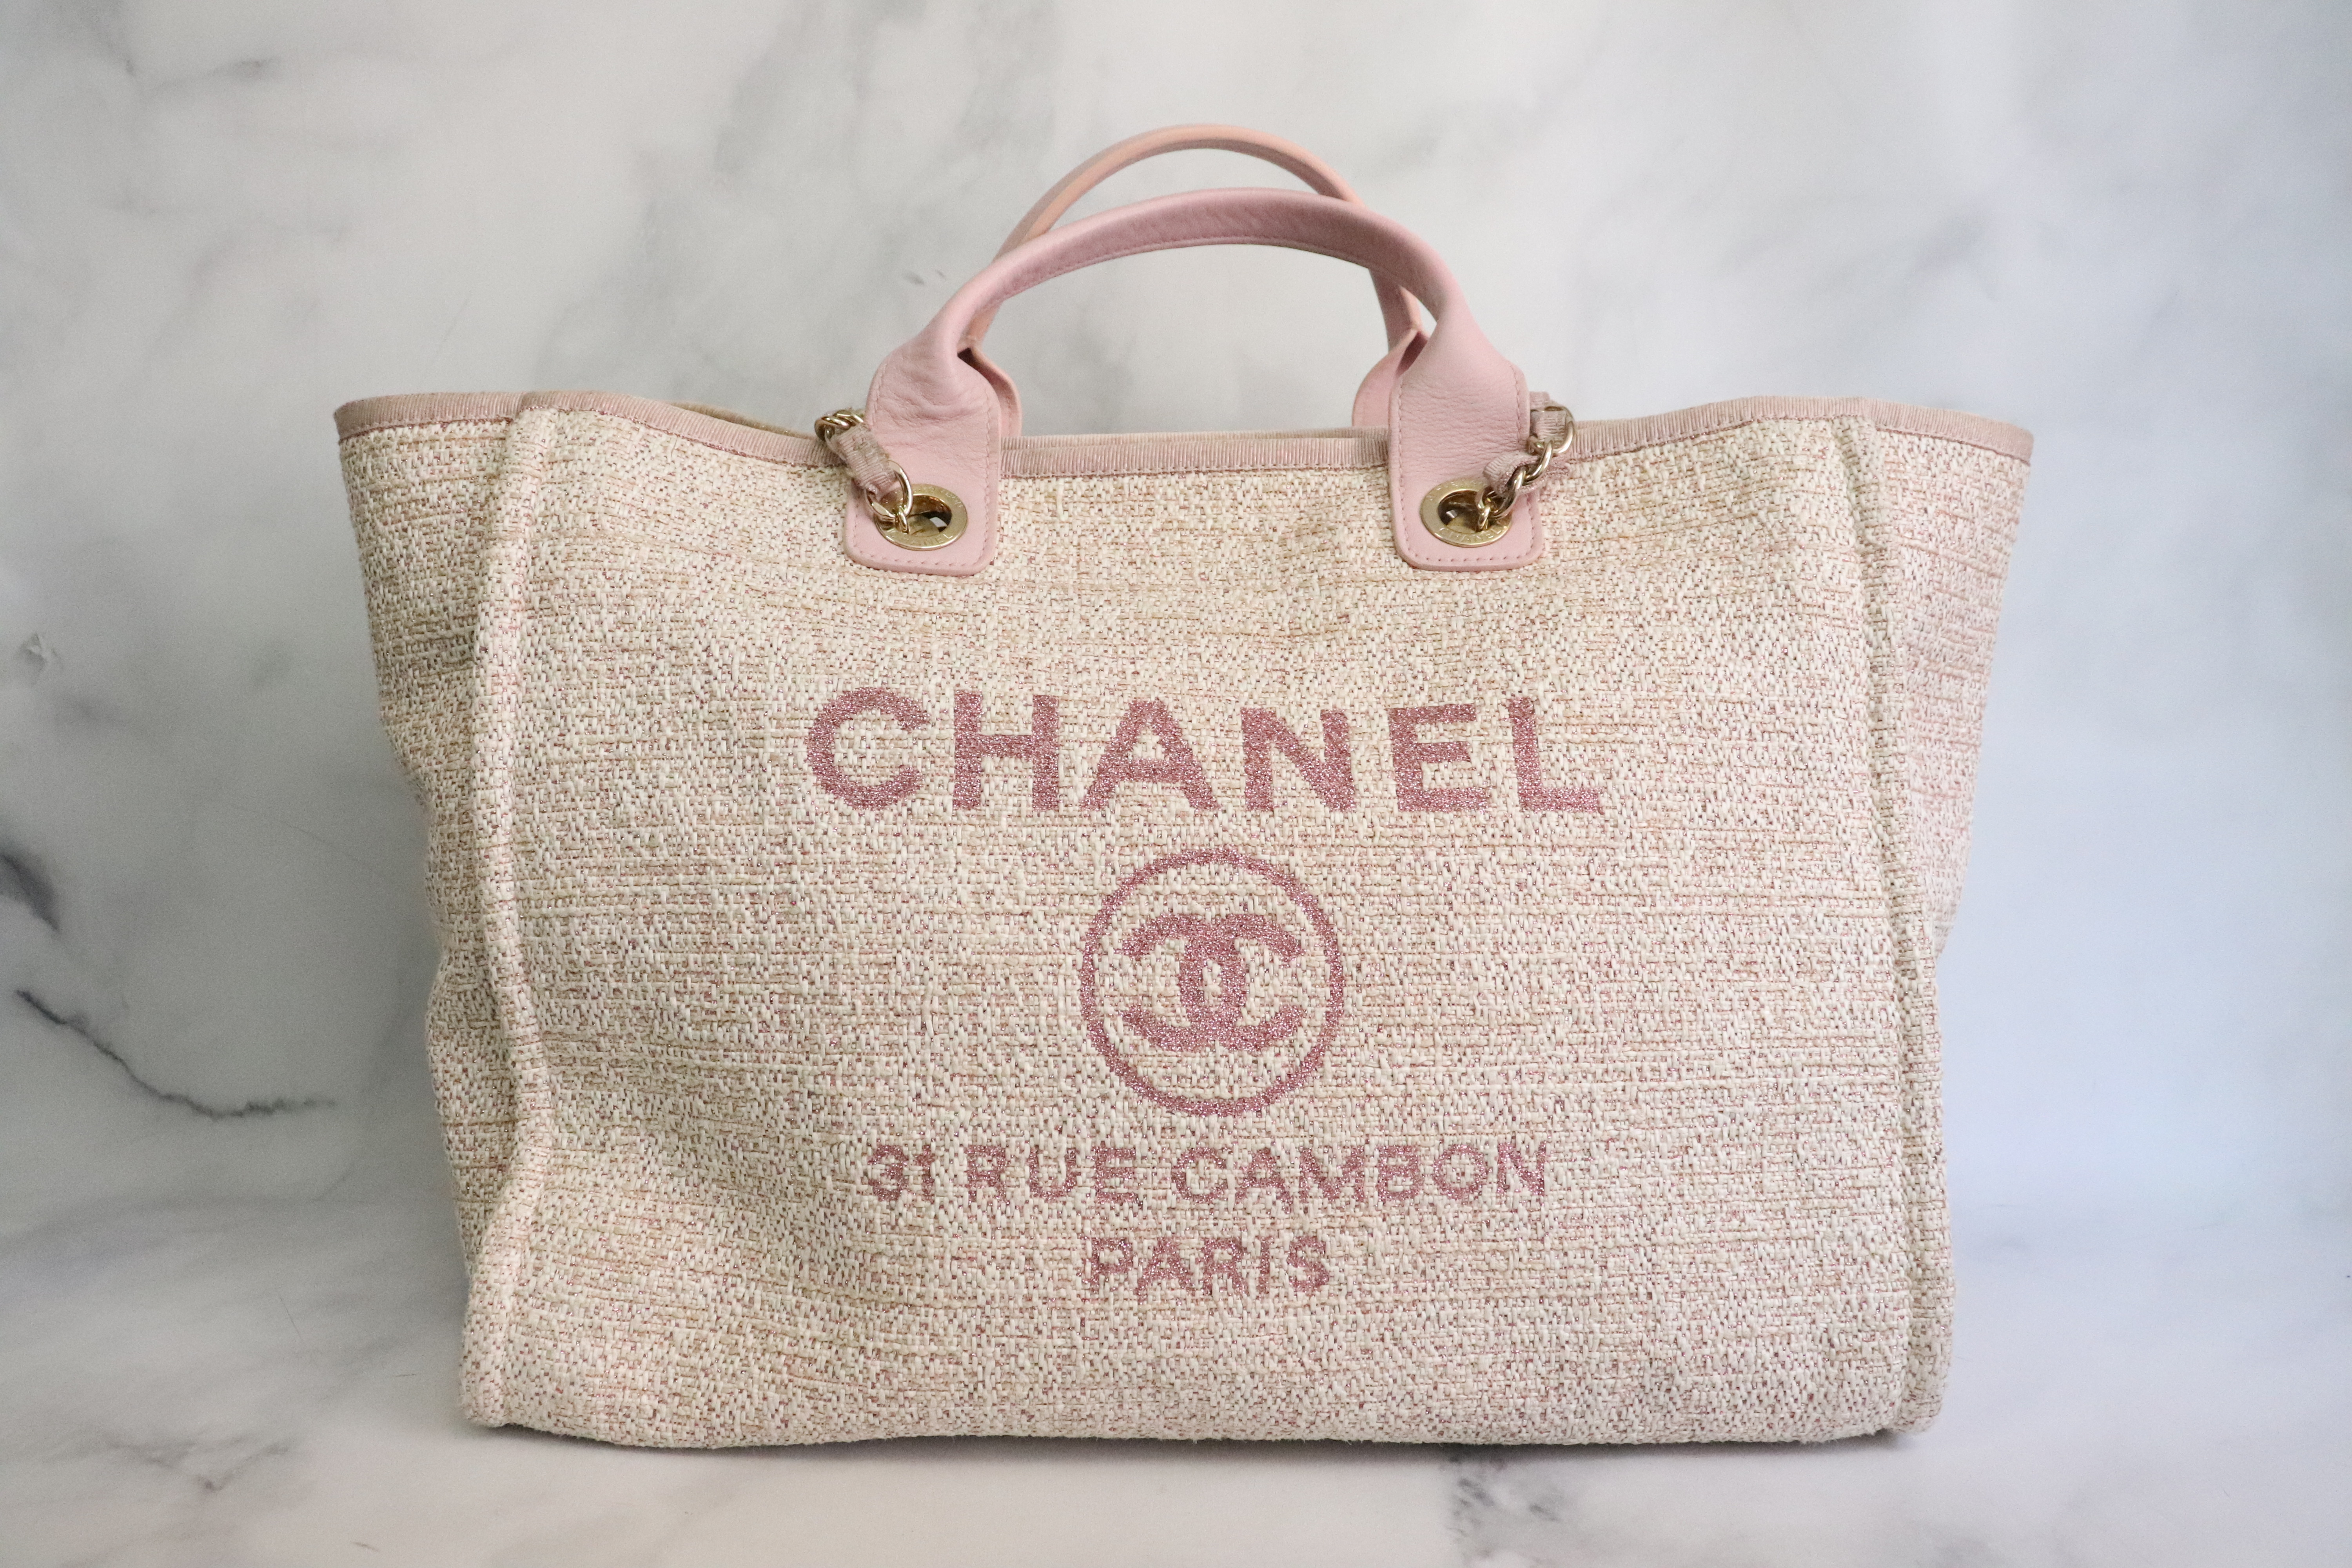 chanel deauville tweed tote